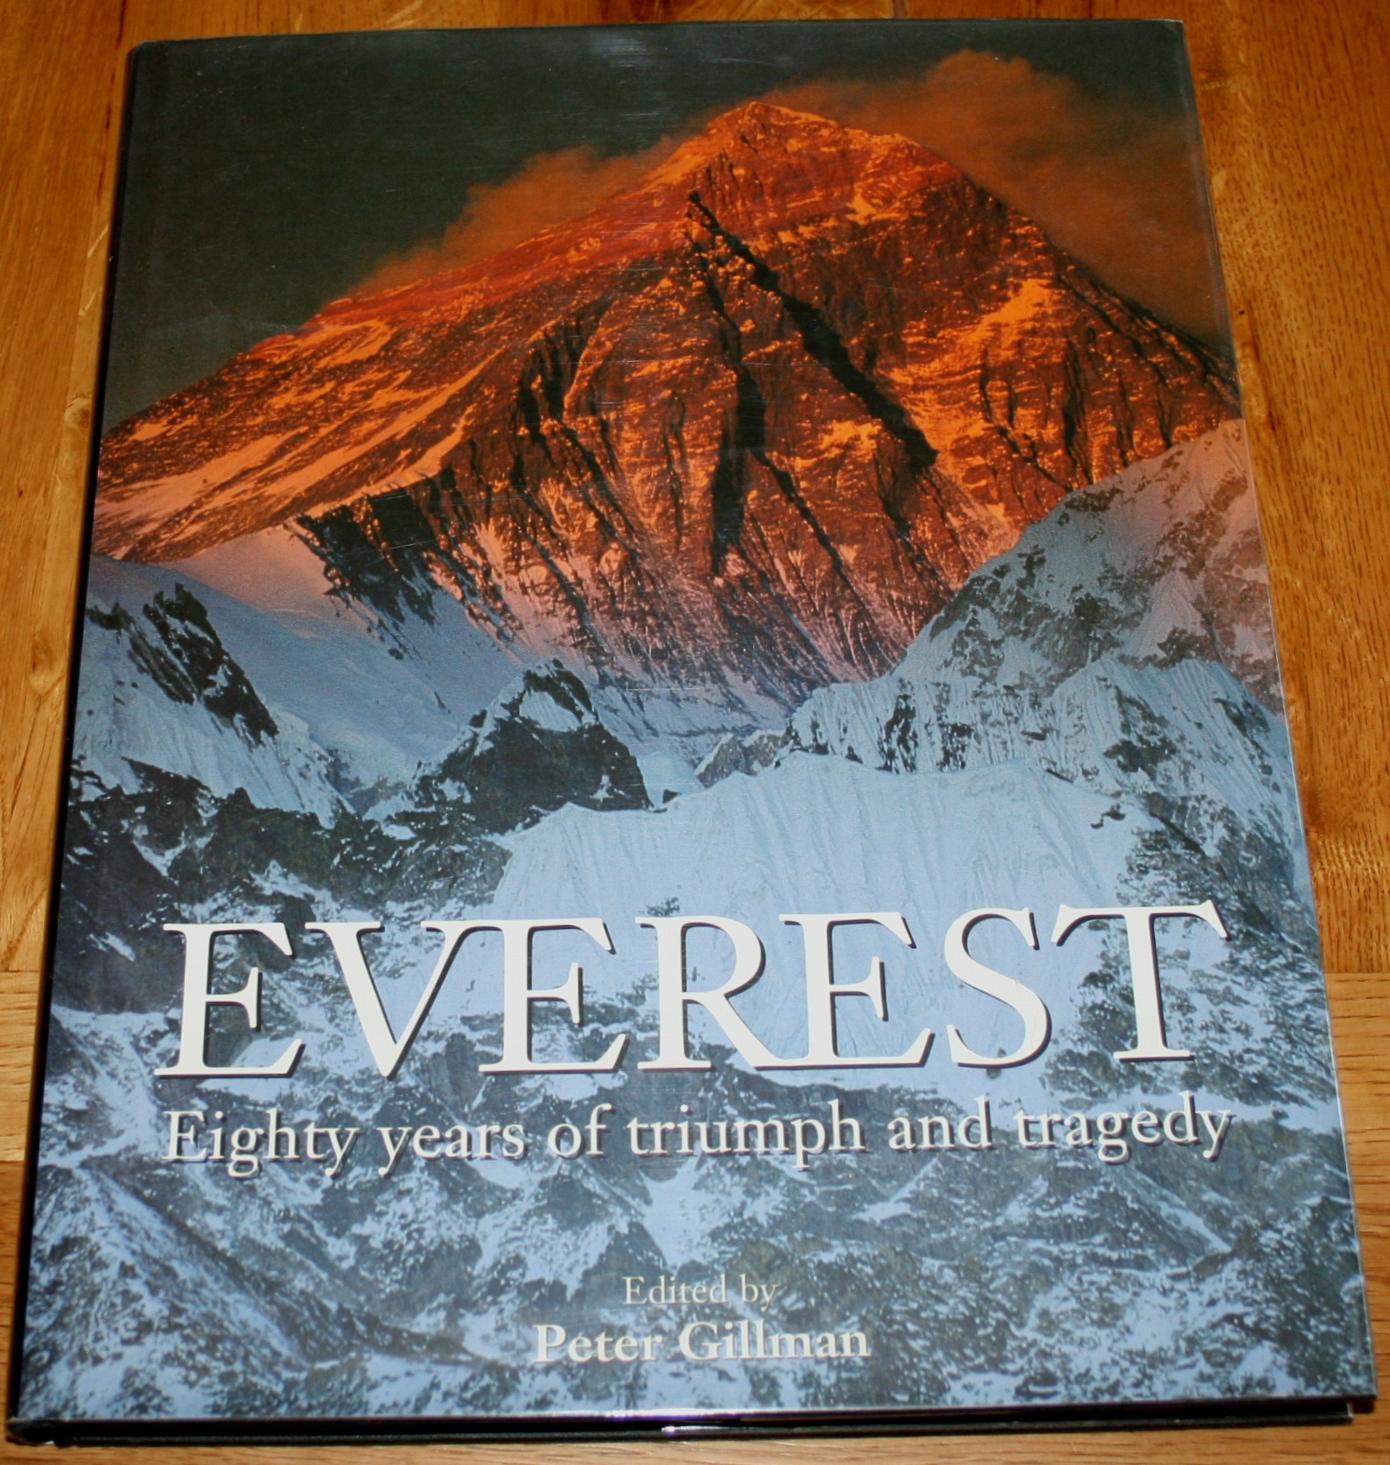 Everest. Eighty years of triumph and tragedy.